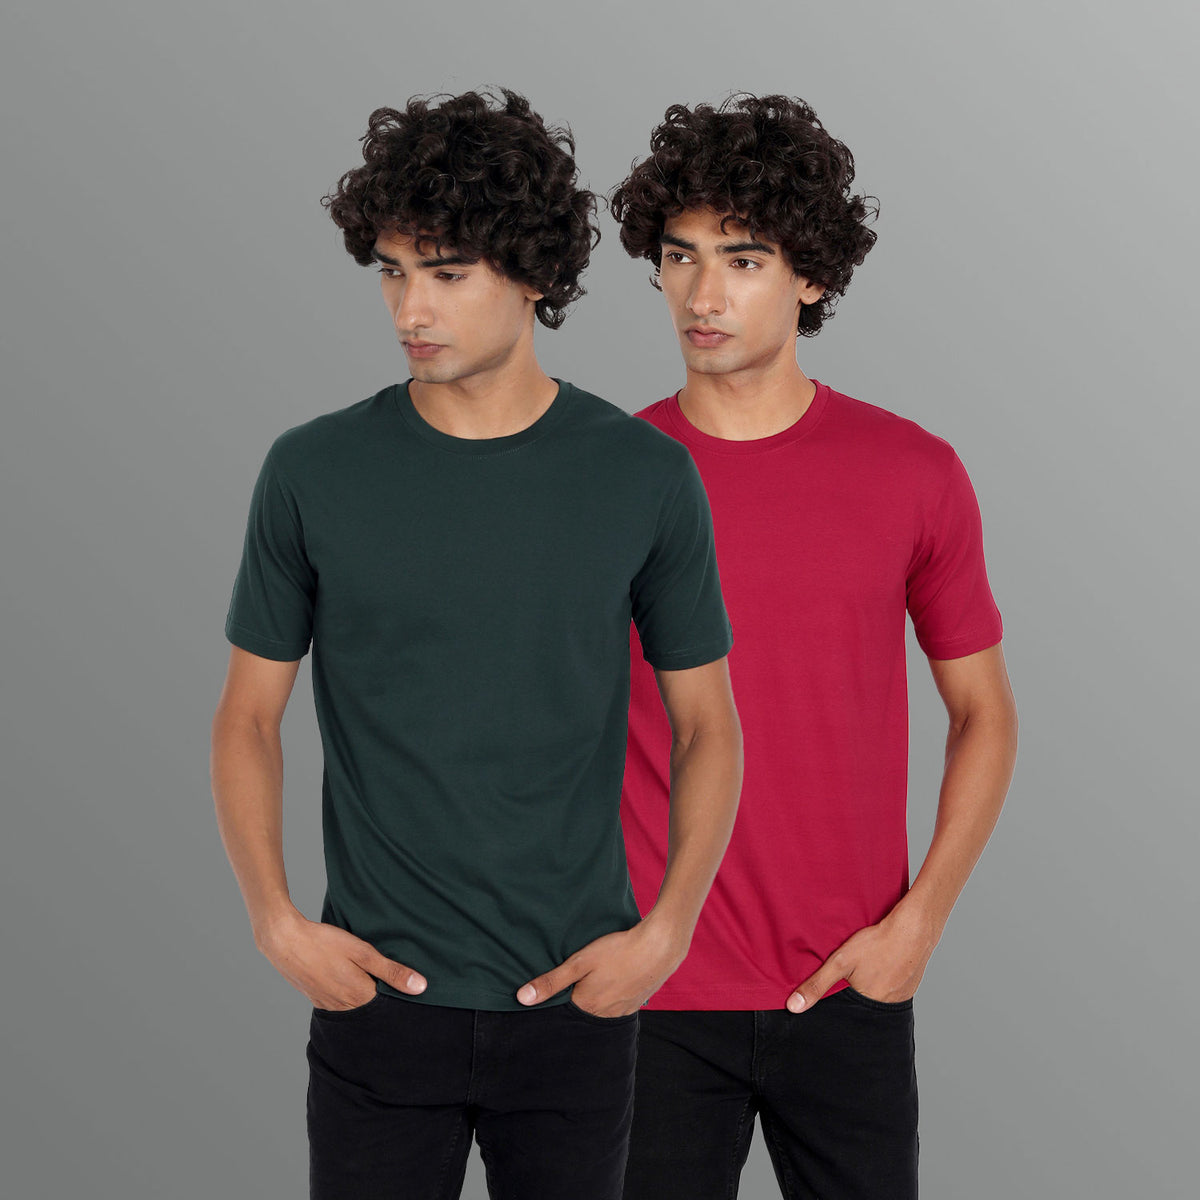 Plain T-shirt Combo For Men Green and Maroon